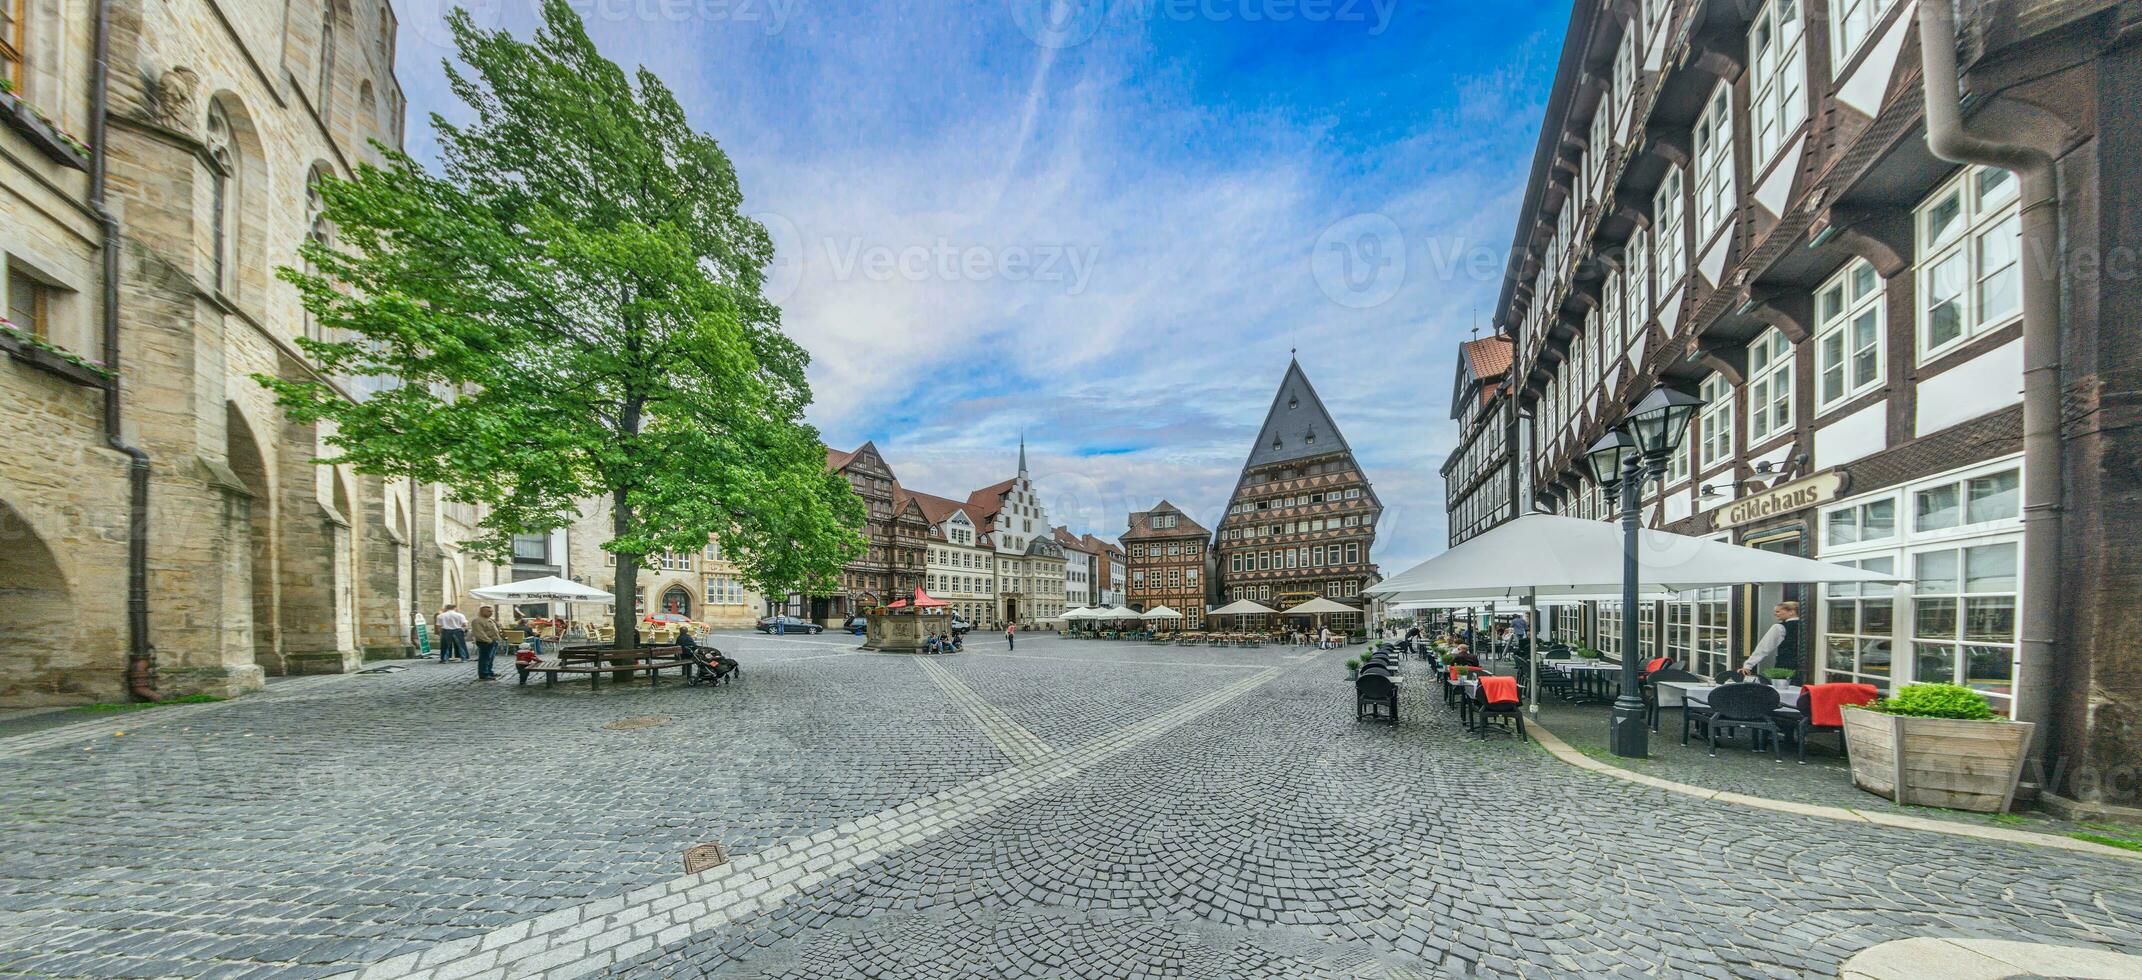 Panoramic view over market place of German historical city Hildesheim photo